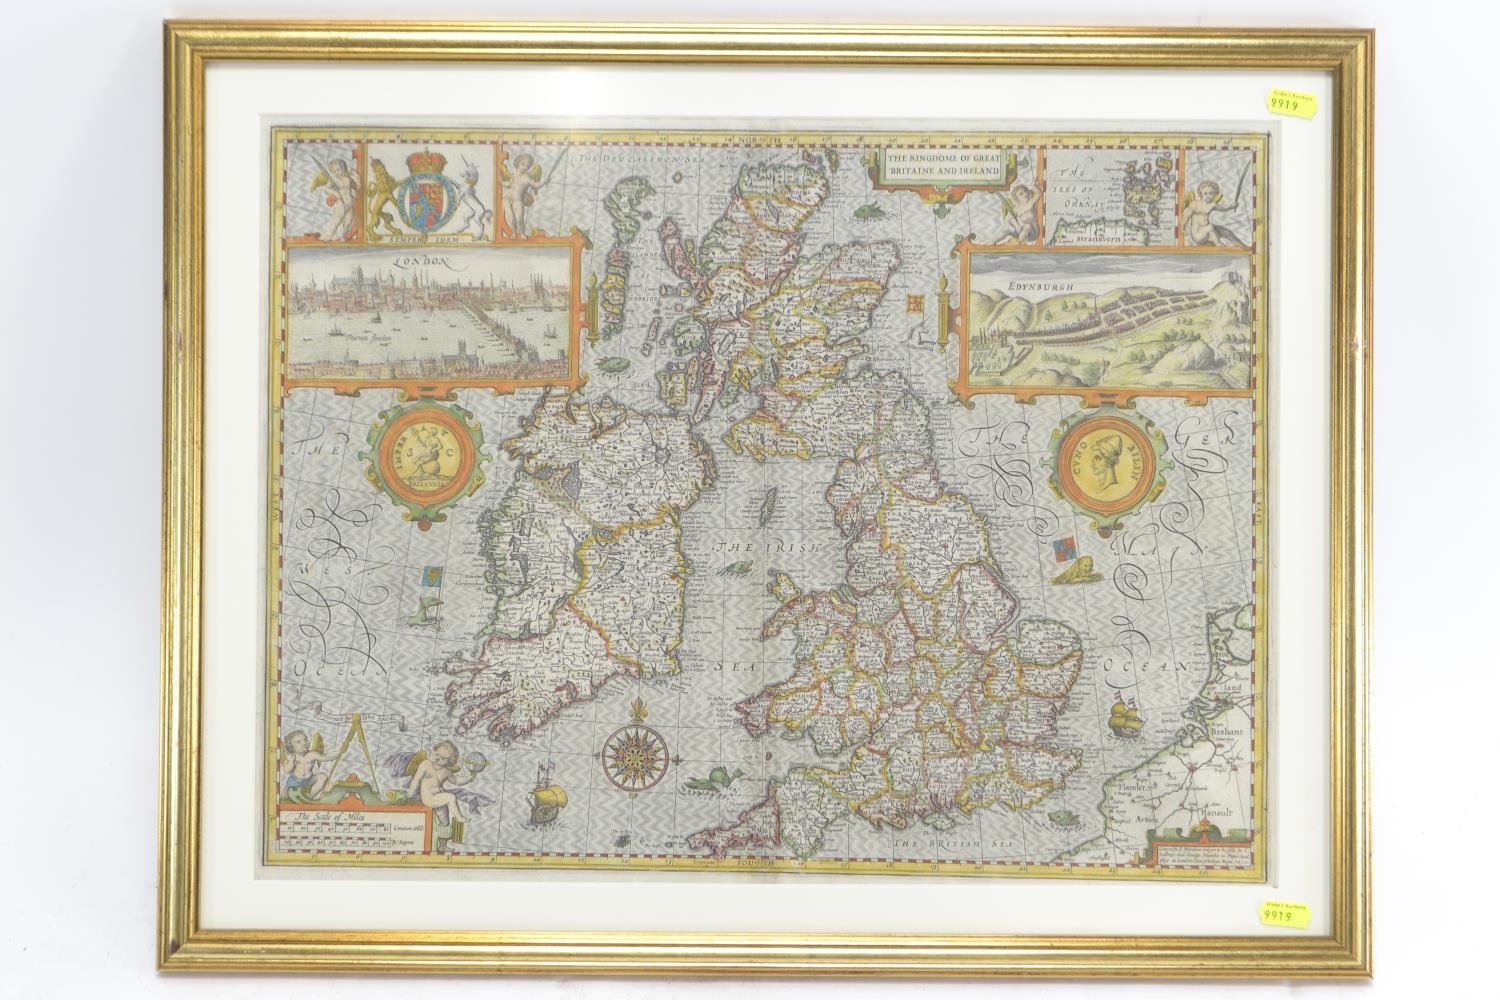 Antiquarian map of the British Isles. Speed (John), The Kingdome of Great Britaine and Ireland, John